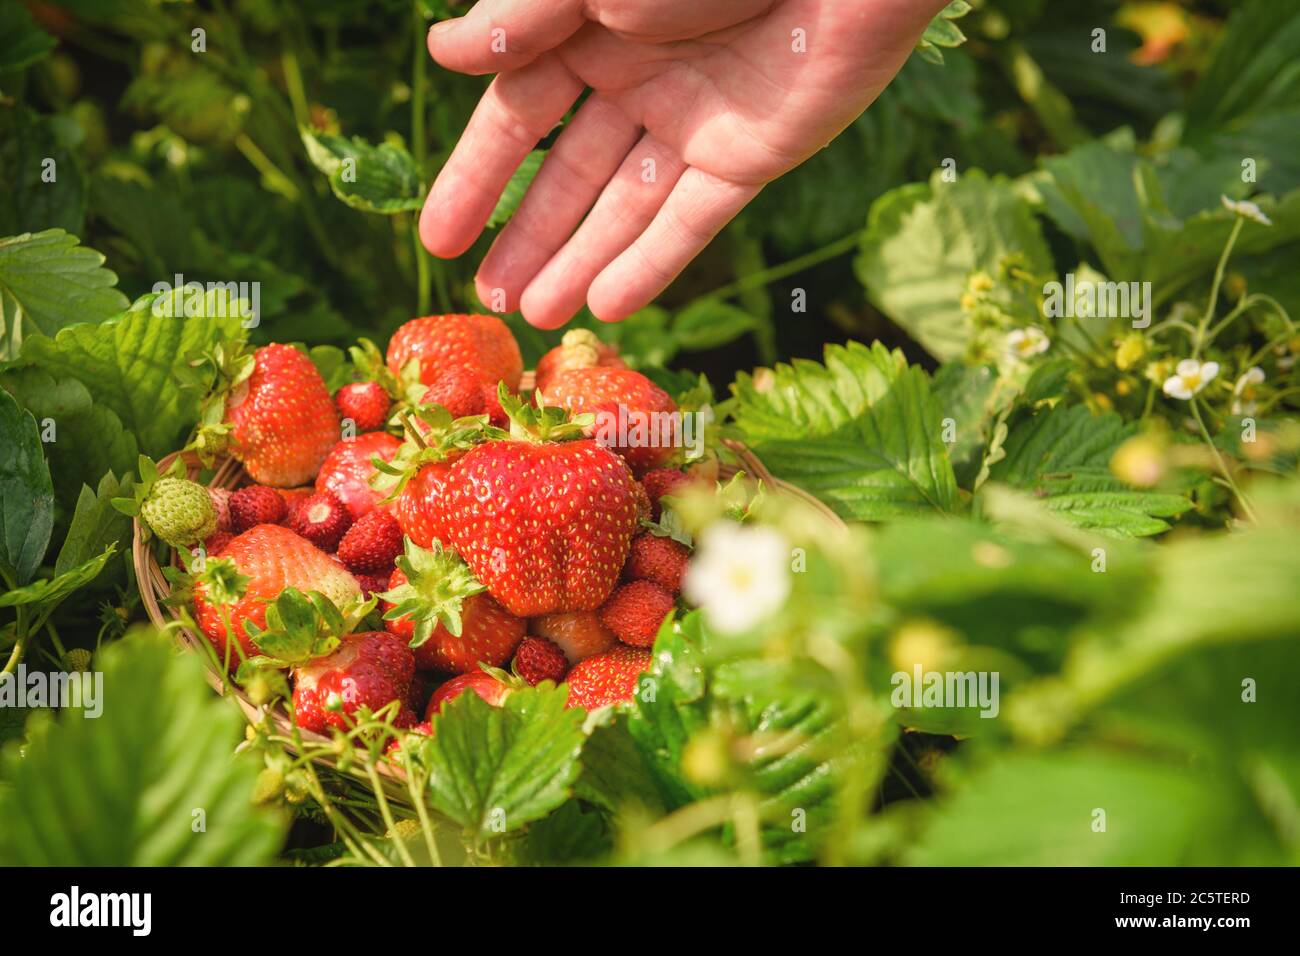 A ripe, juicy, red strawberry lying on a plate, among the green strawberry bushes, in the garden. Stock Photo